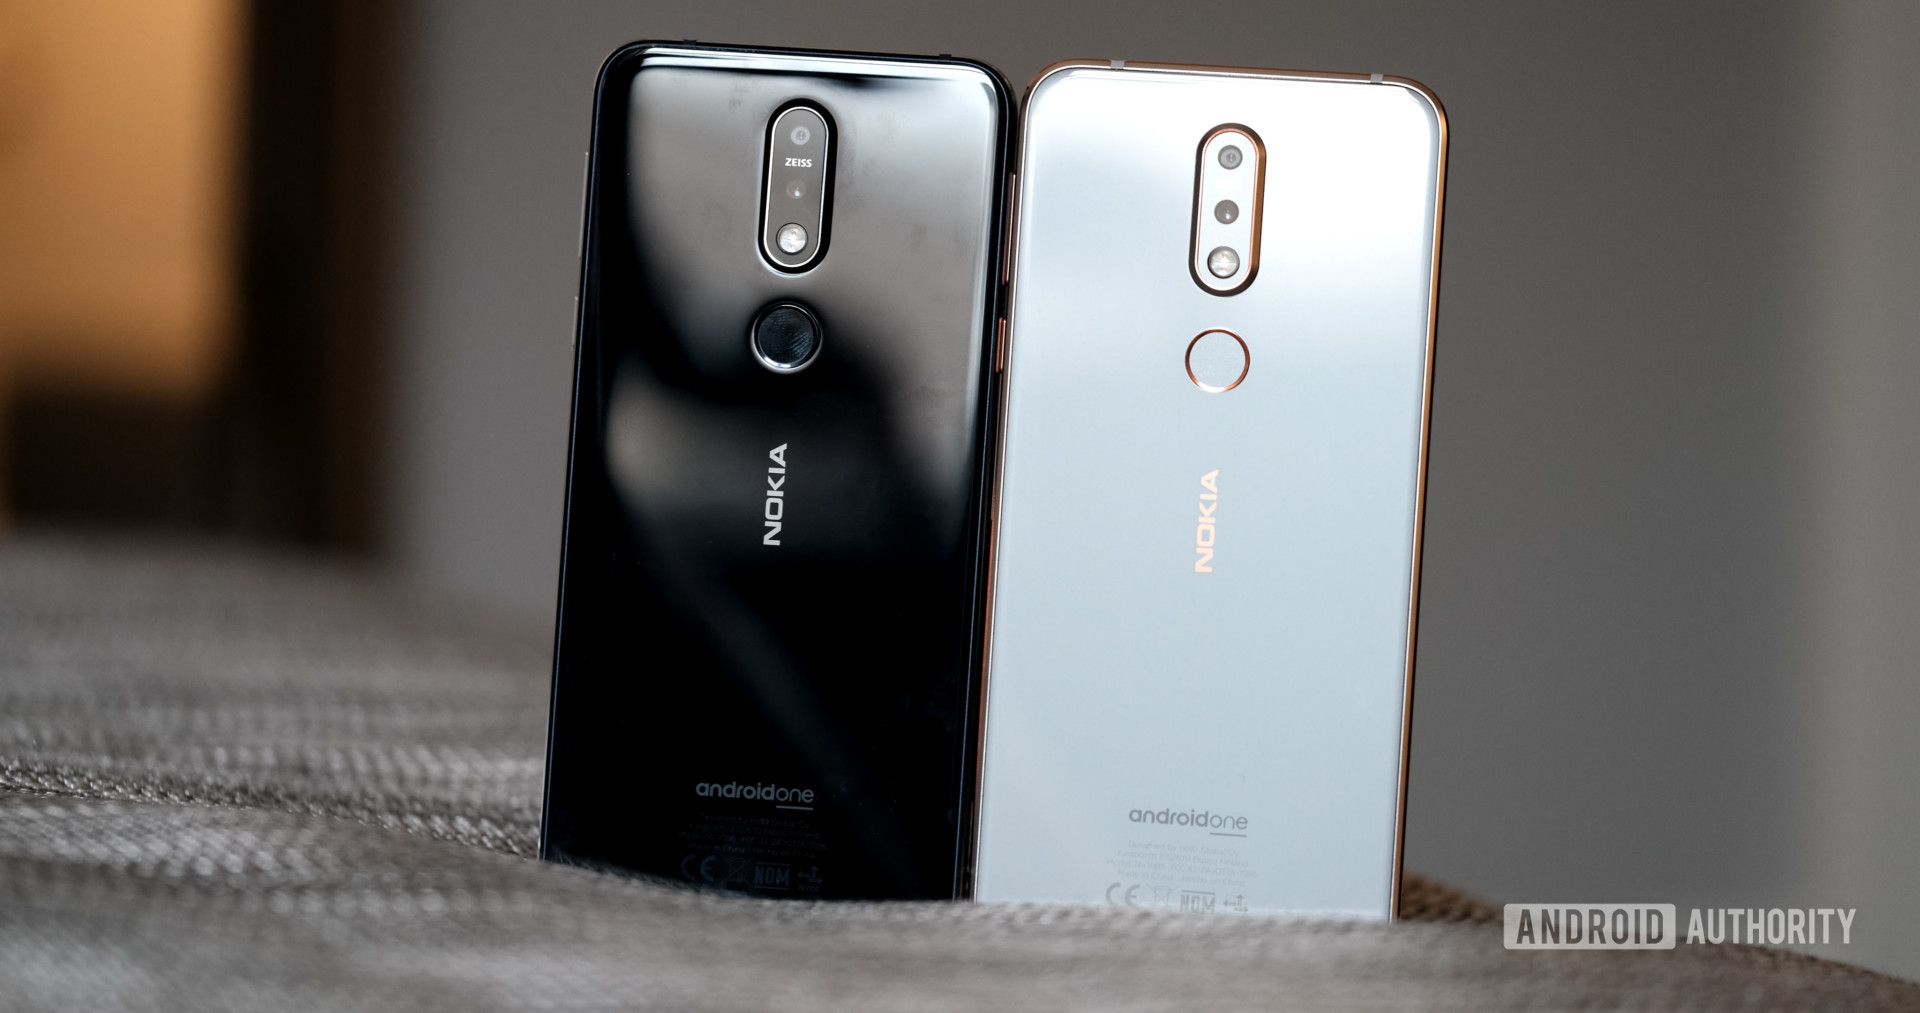 Backside of two Nokia 7.1 smartphones in white and black color.